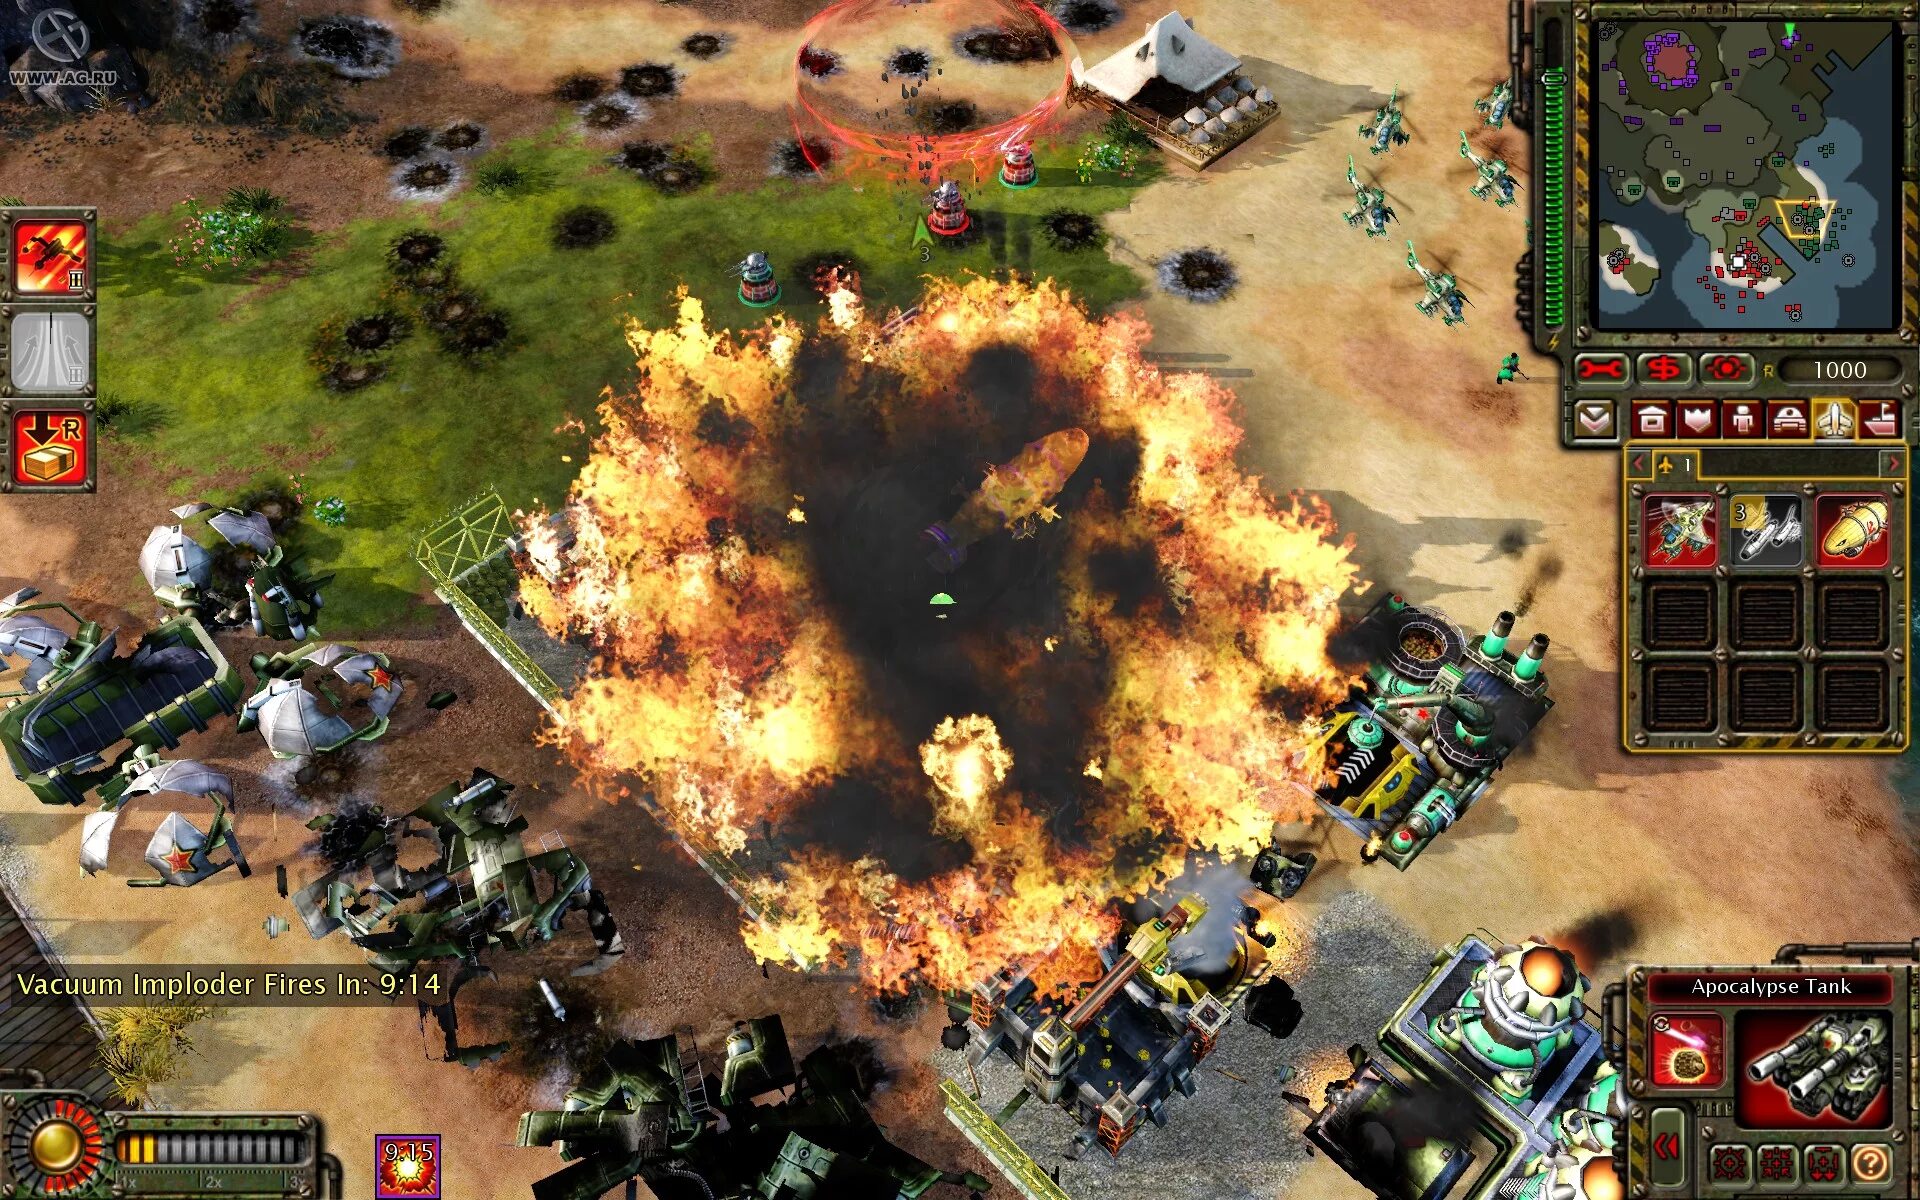 Rts. RTS игр (real-time Strategy). Command & Conquer: Red Alert 3. Command & Conquer™ Red Alert™ 3 геймплей. Старые стратегии РТС.